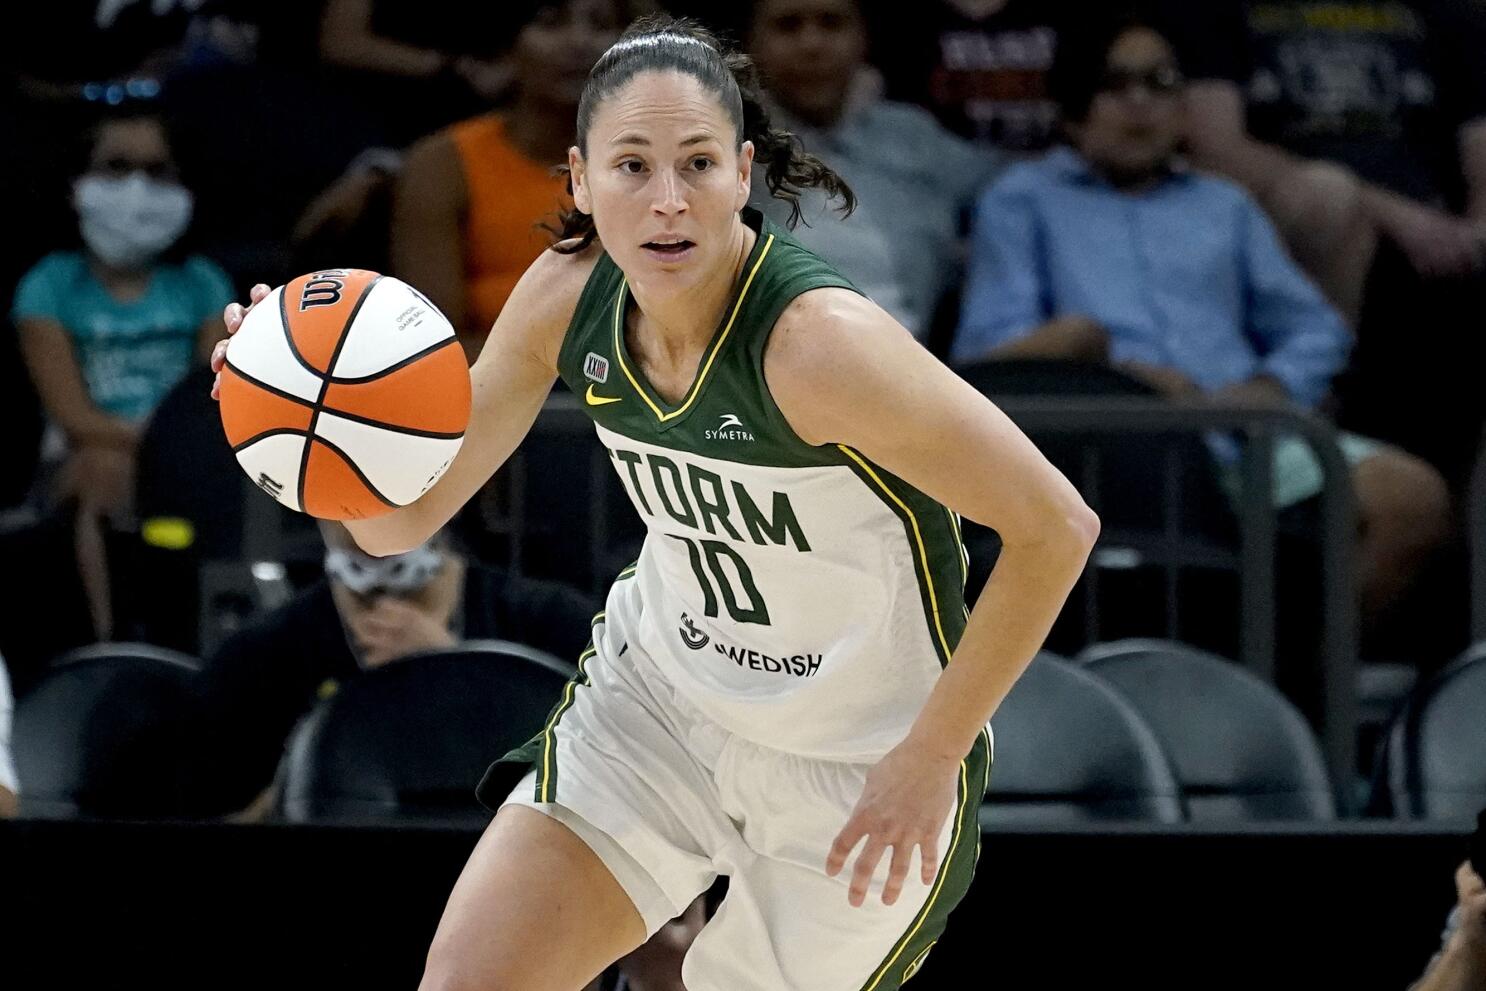 Career over, but Sue Bird's greatness goes far beyond the